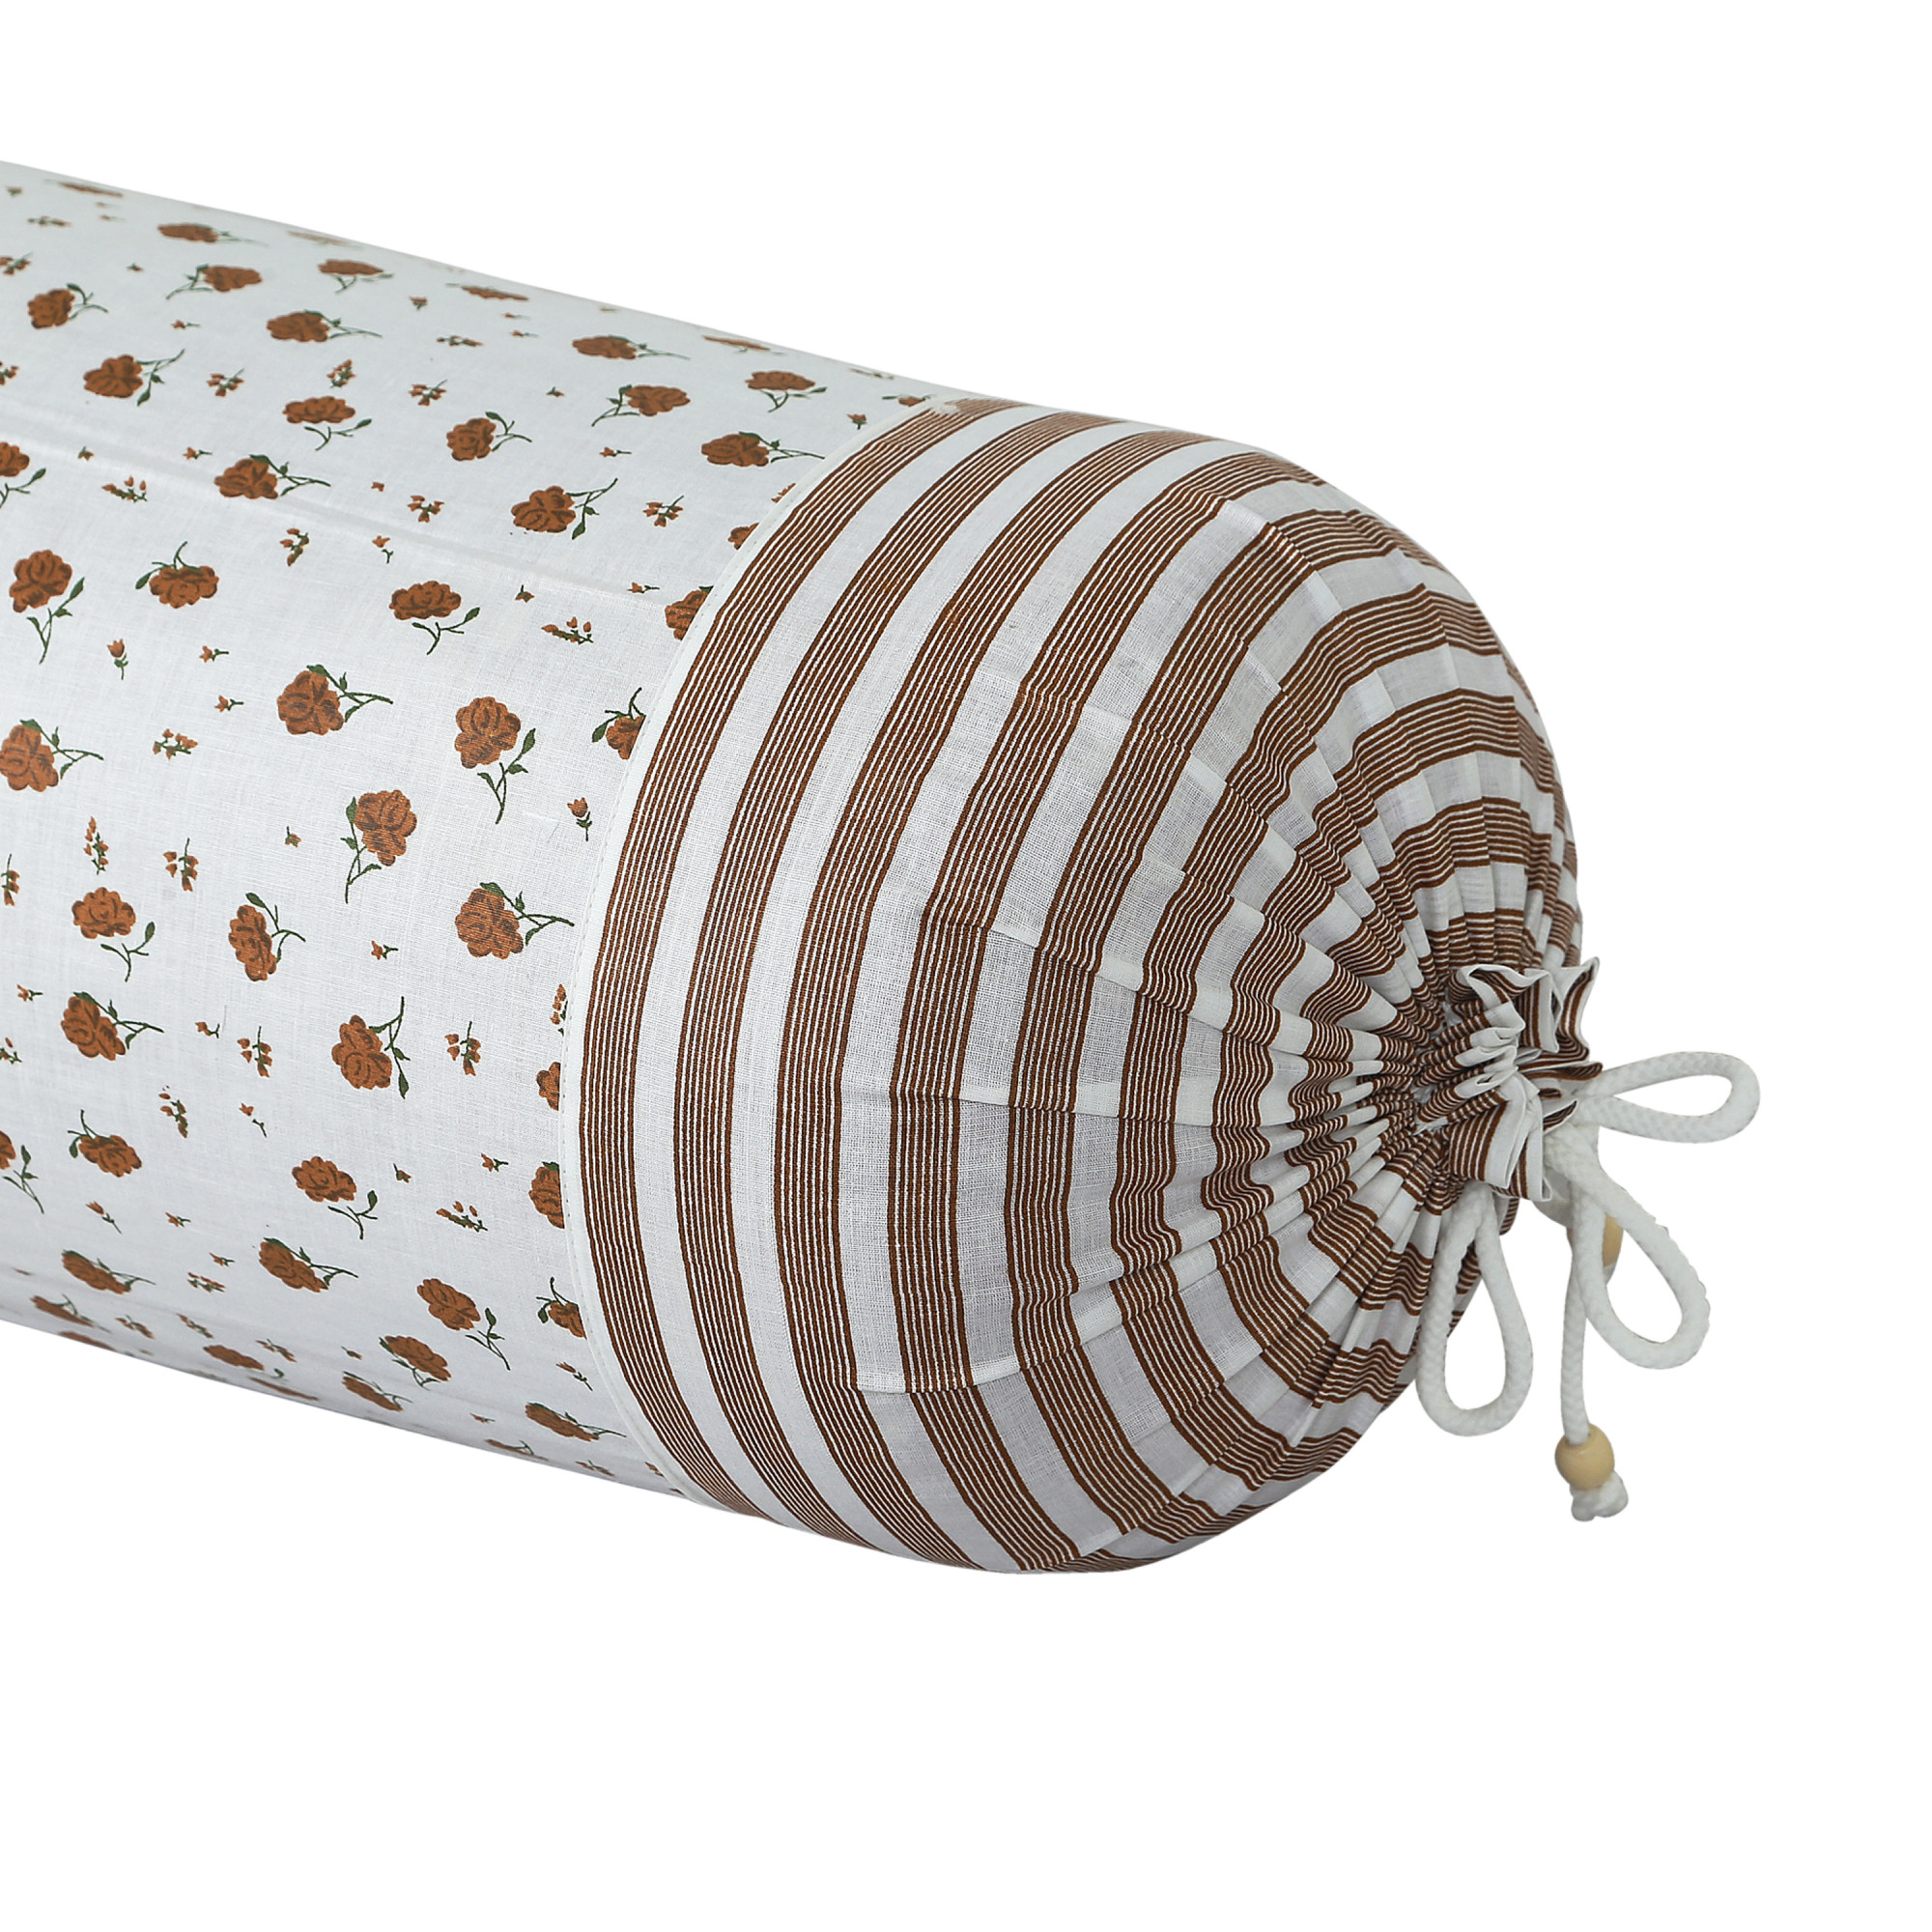 Kuber Industries Bolster Covers | Cotton Bolster Cover Set | Diwan Bolster Cover Set | Bolster Pillow Cover | Flower Masand Cover | 16x32 Inch | Pack of 4 | Multi